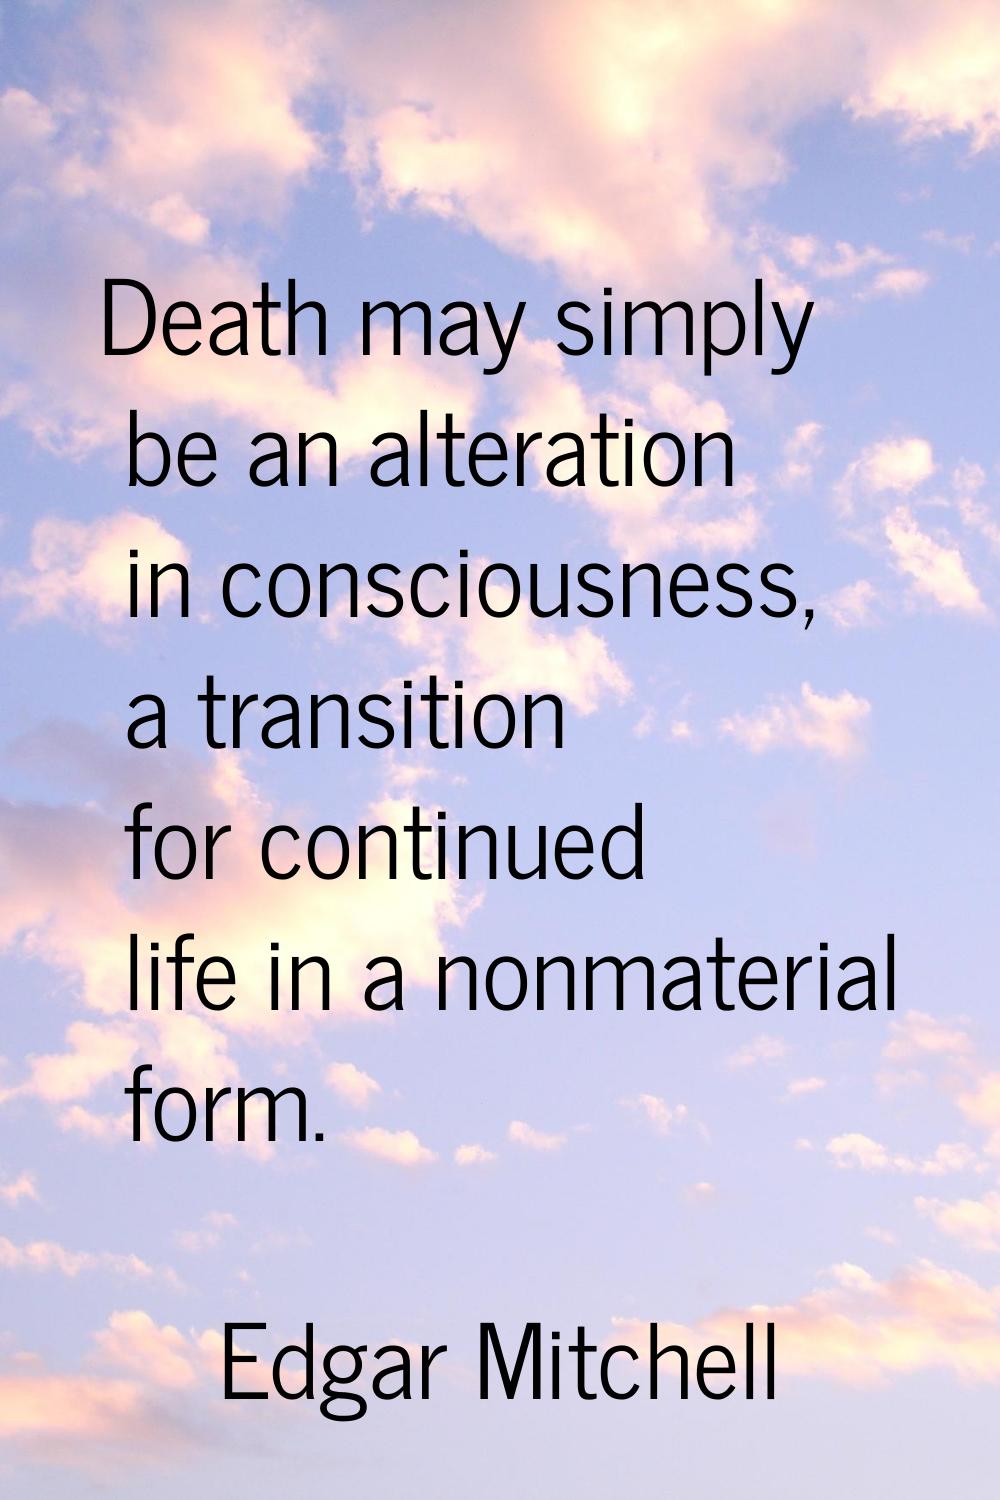 Death may simply be an alteration in consciousness, a transition for continued life in a nonmateria